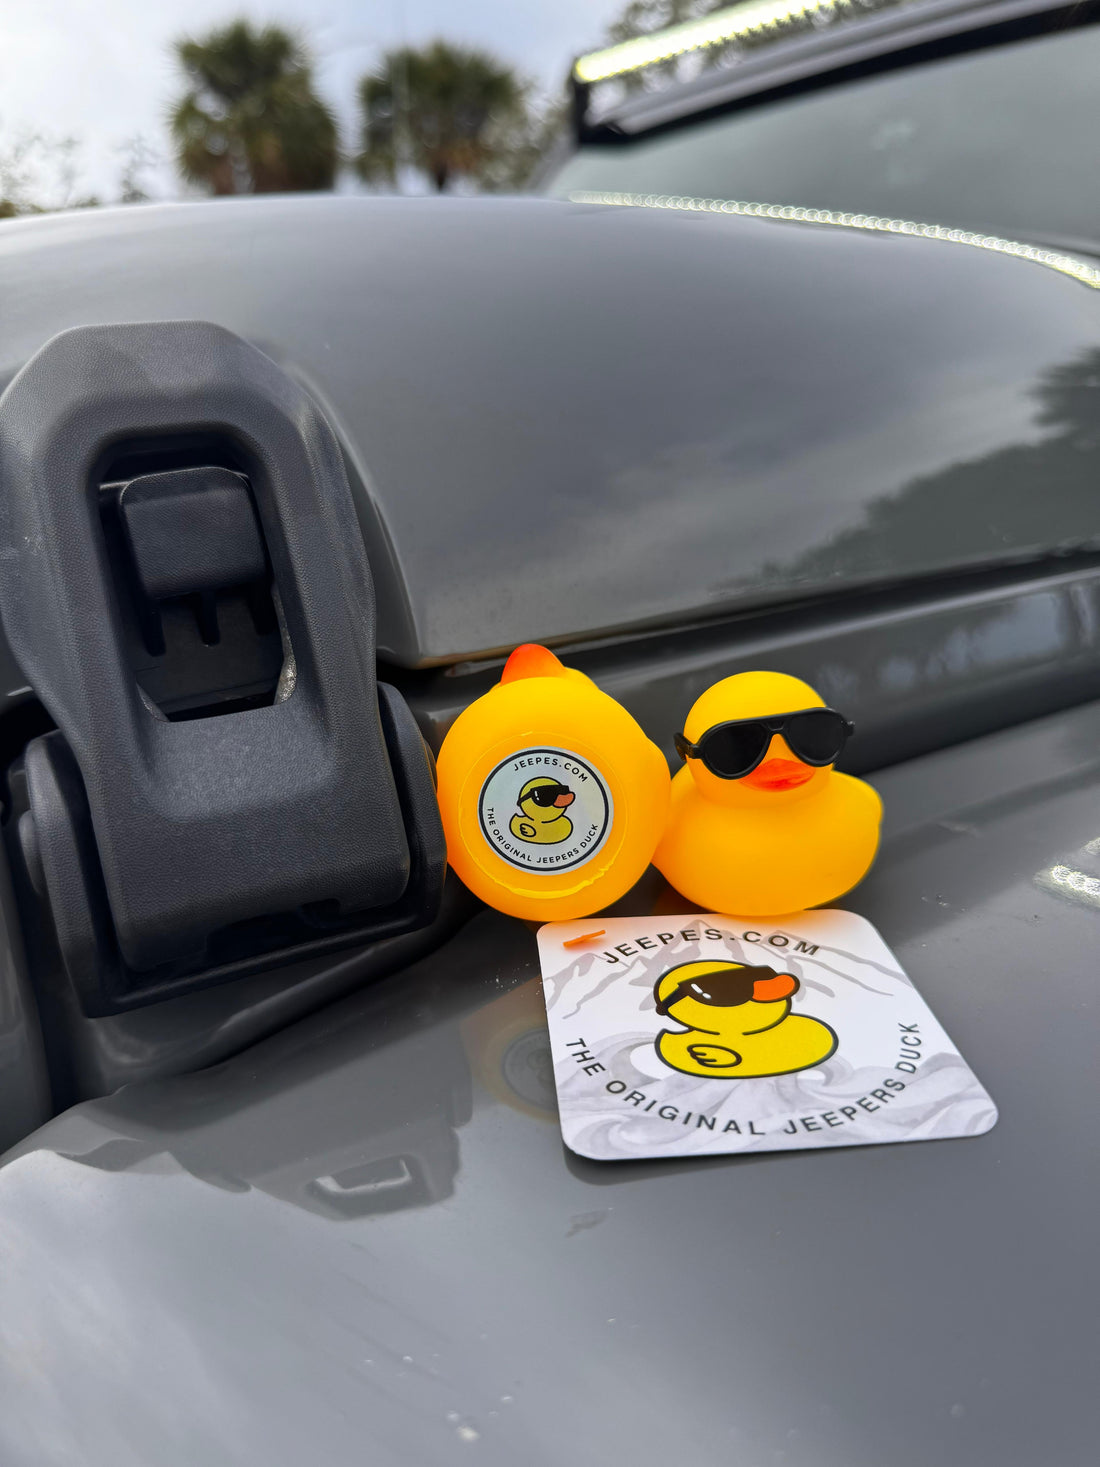 Discover the Adventure with Jeepes - The Original Jeepers Duck